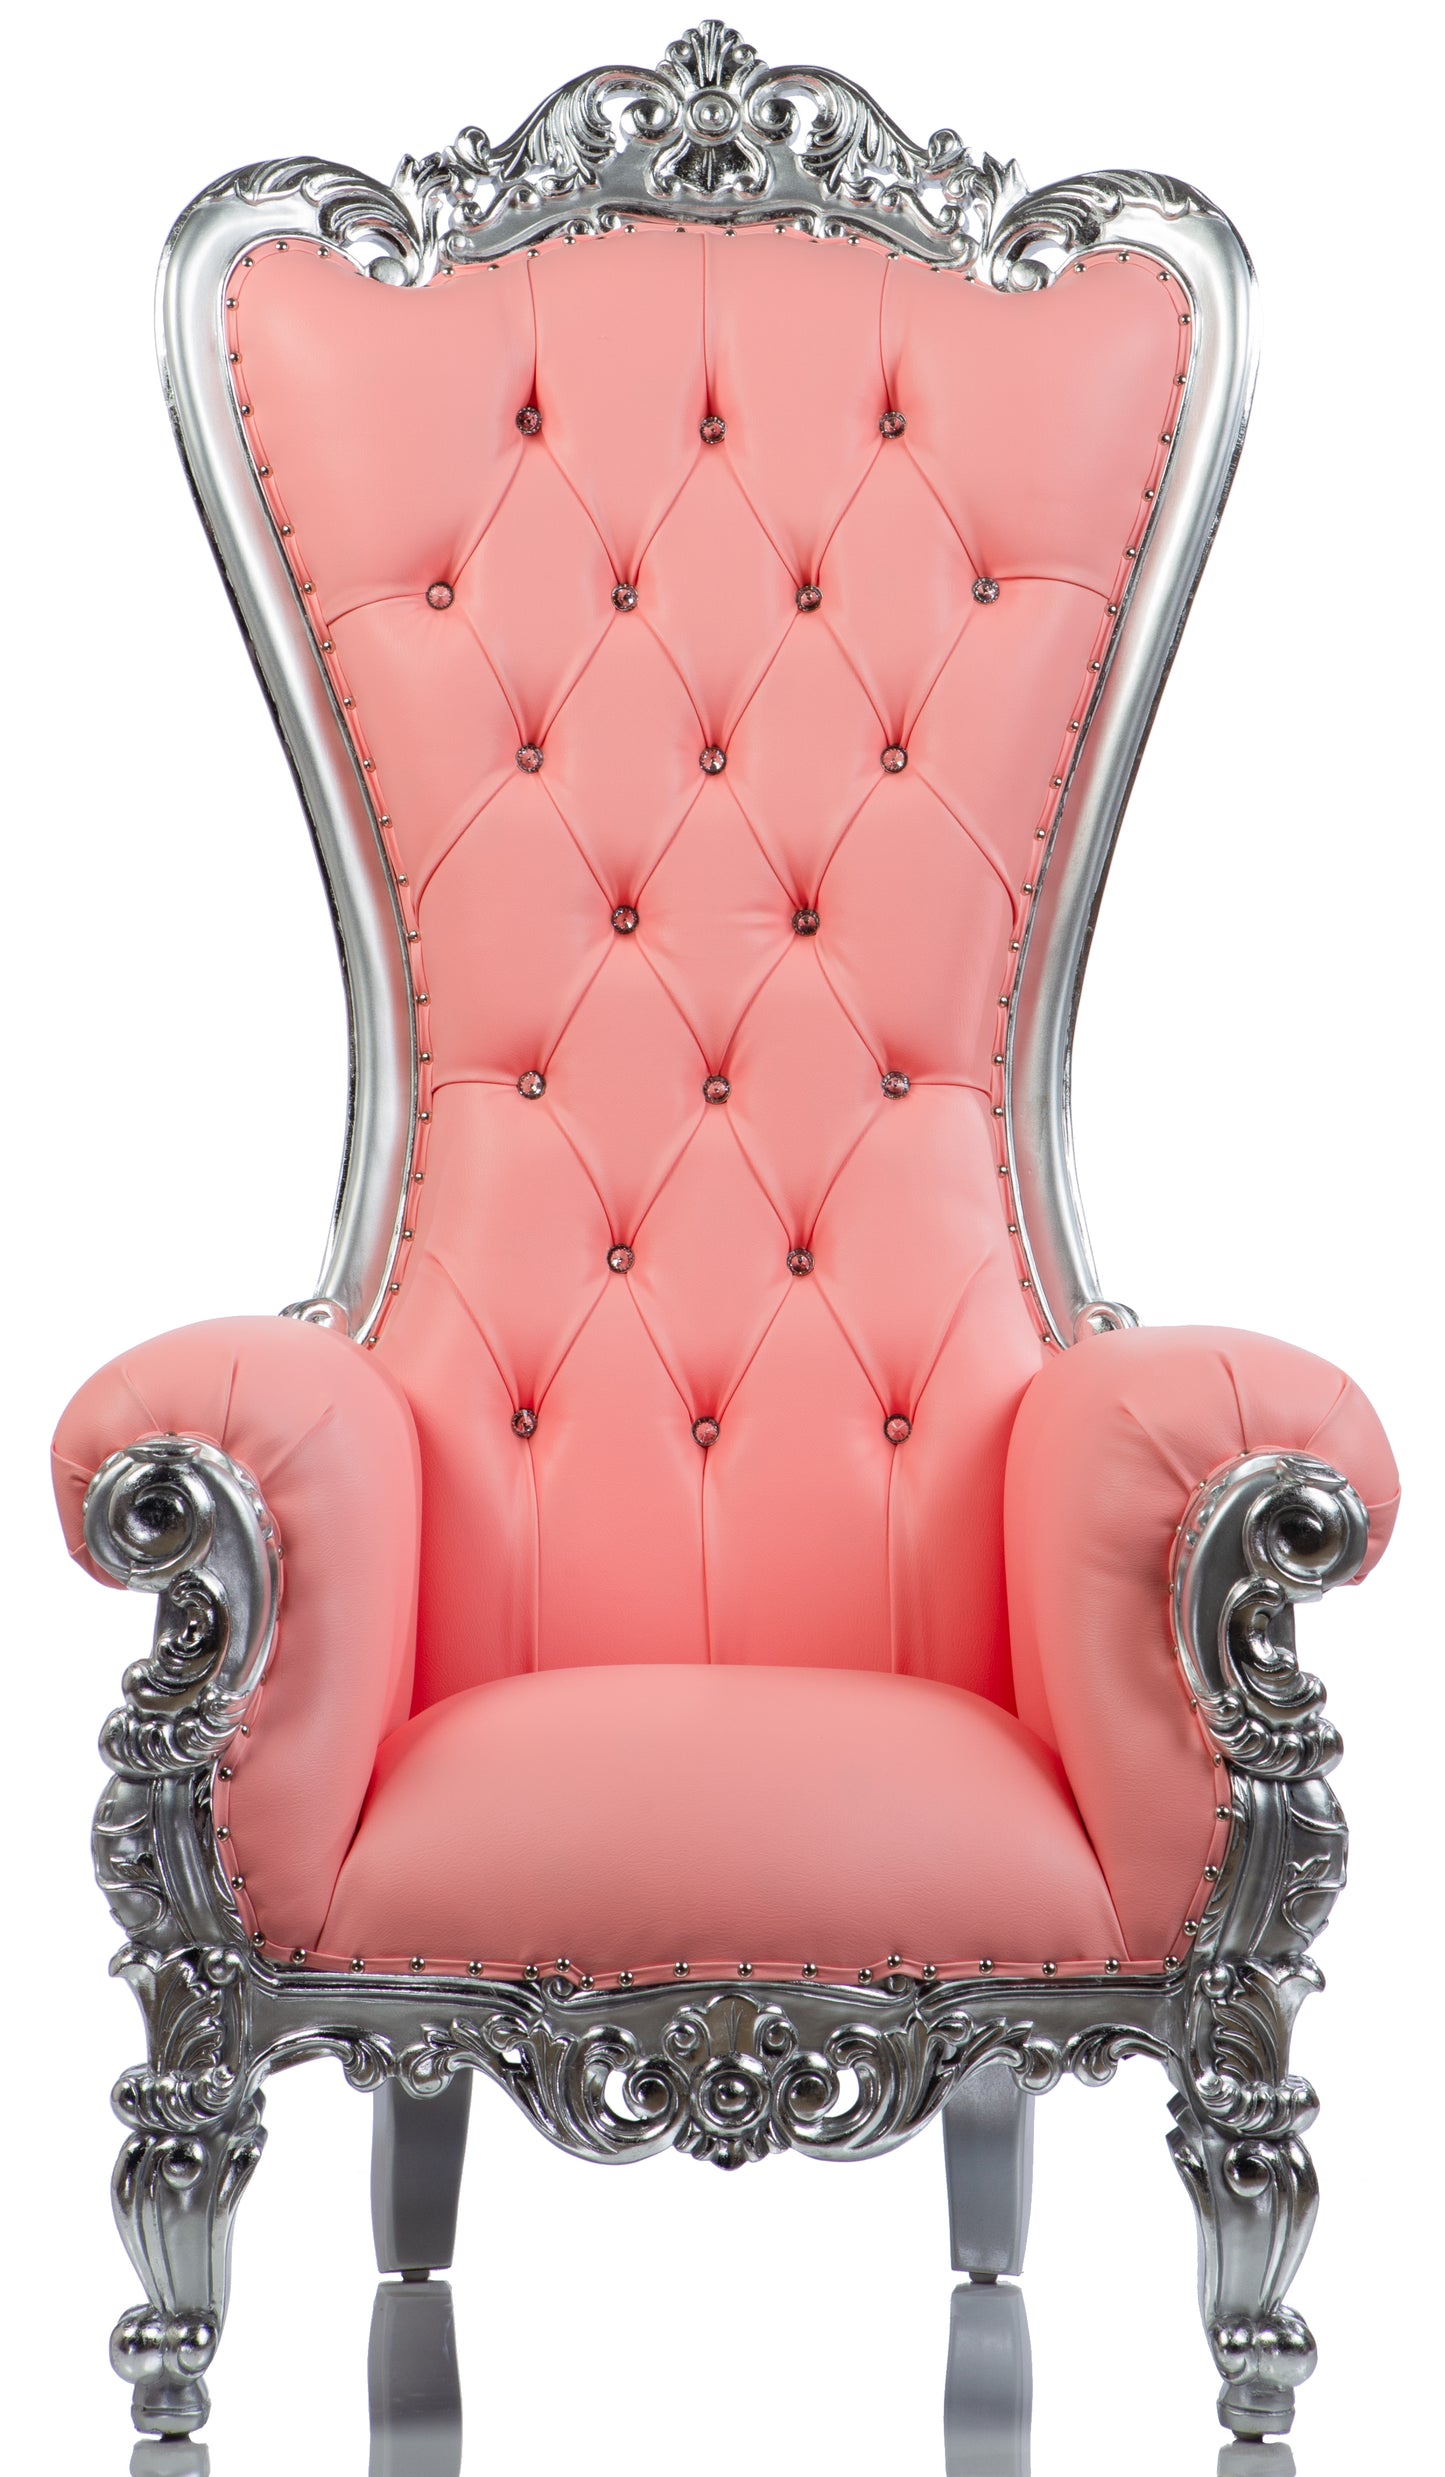 Cotton Candy Shellback Throne Pink/Silver (West Coast)